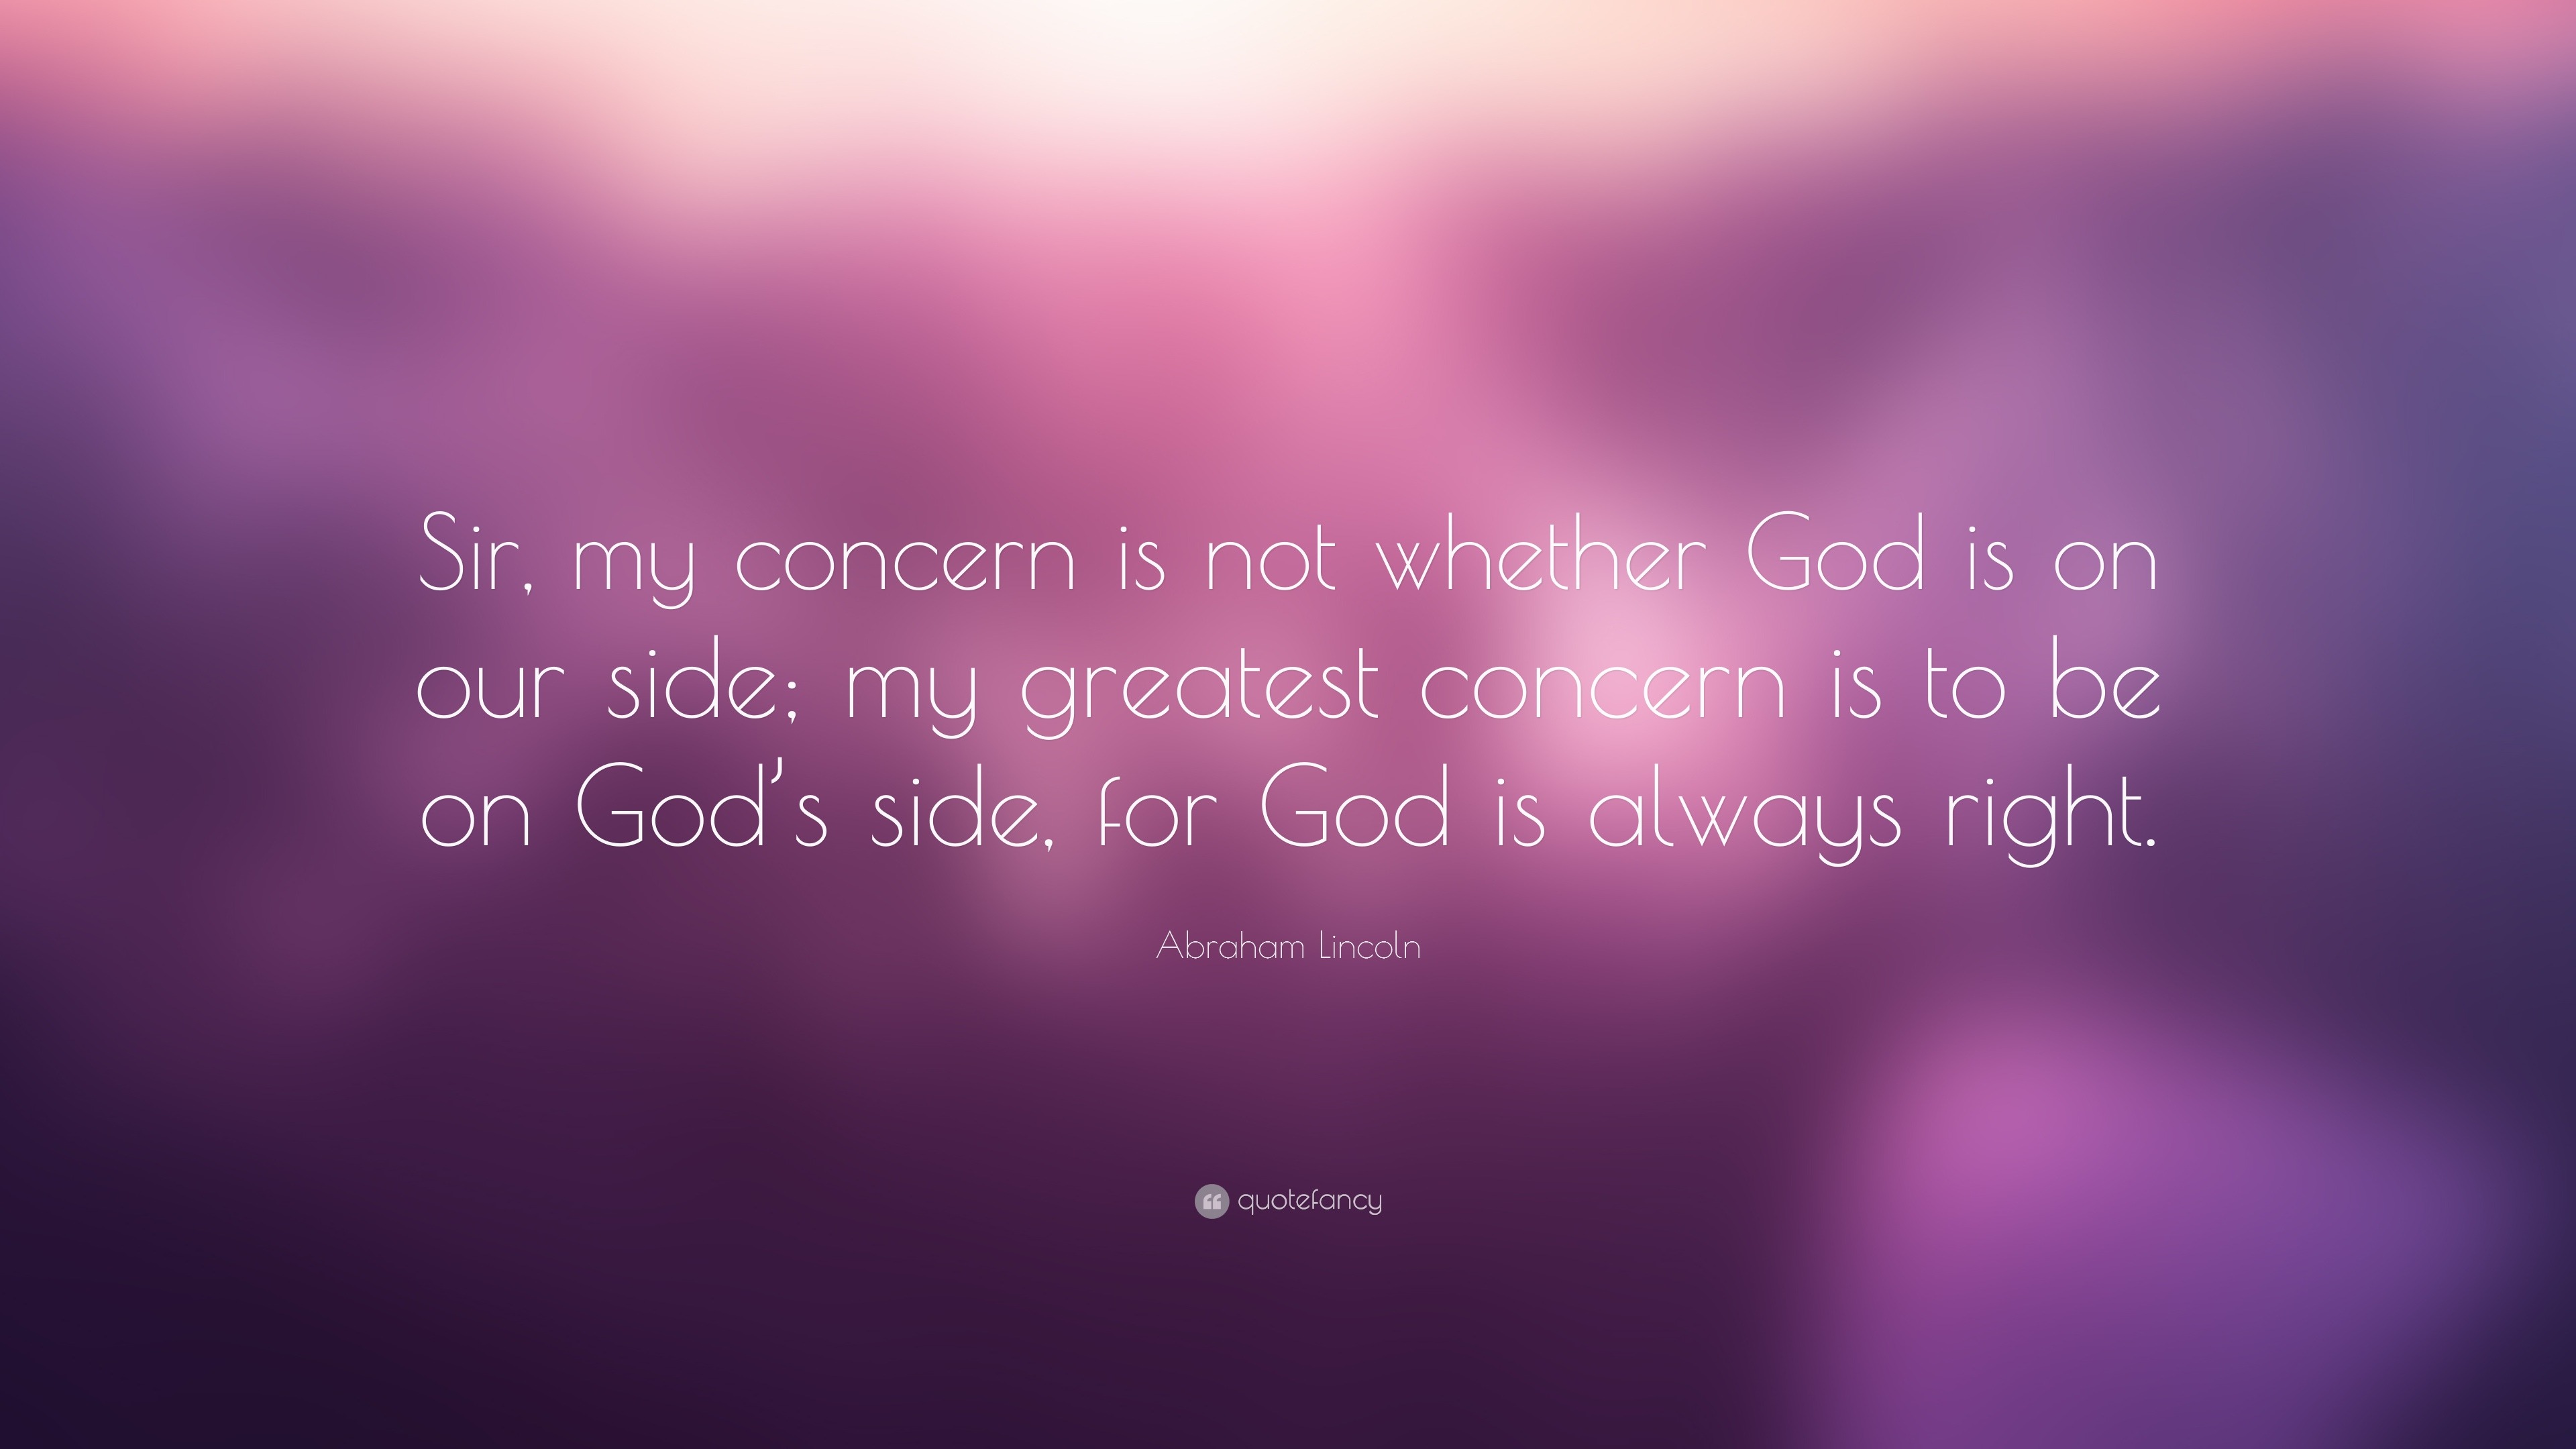 Abraham Lincoln Quote: “Sir, my concern is not whether God is on our ...